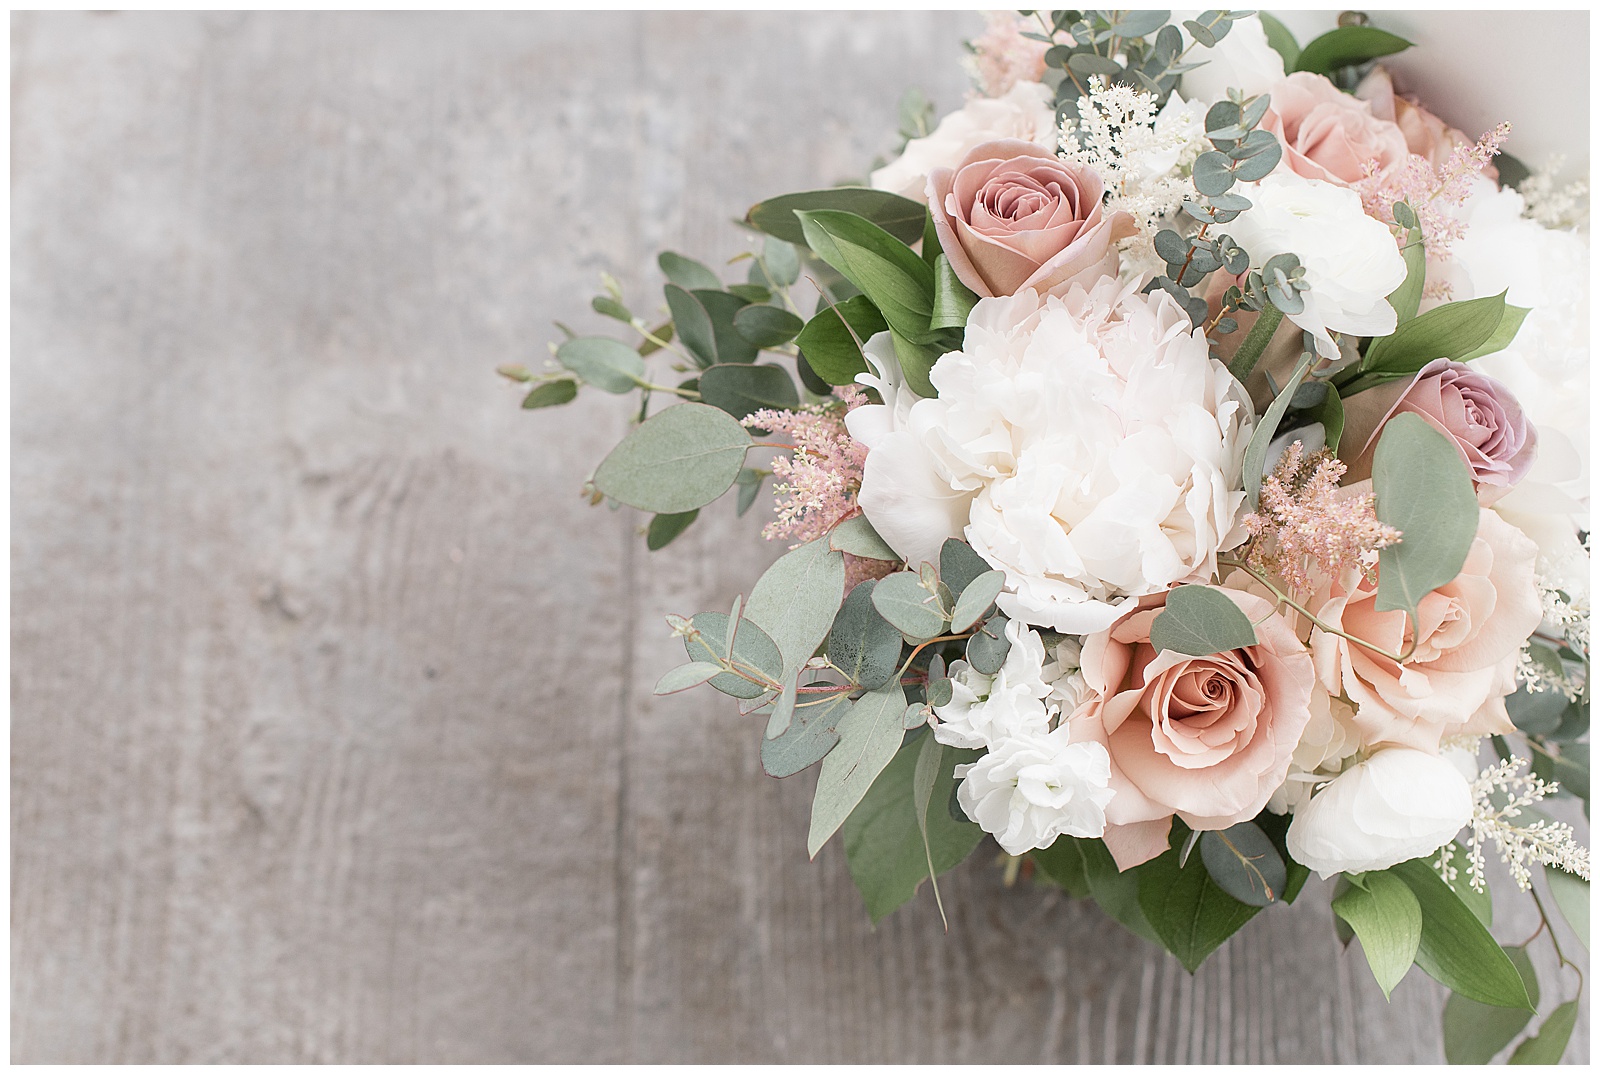 overhead photo of bridal bouquet sitting on gray wooden floor filled with white peonies, light pink roses, and eucalyptus